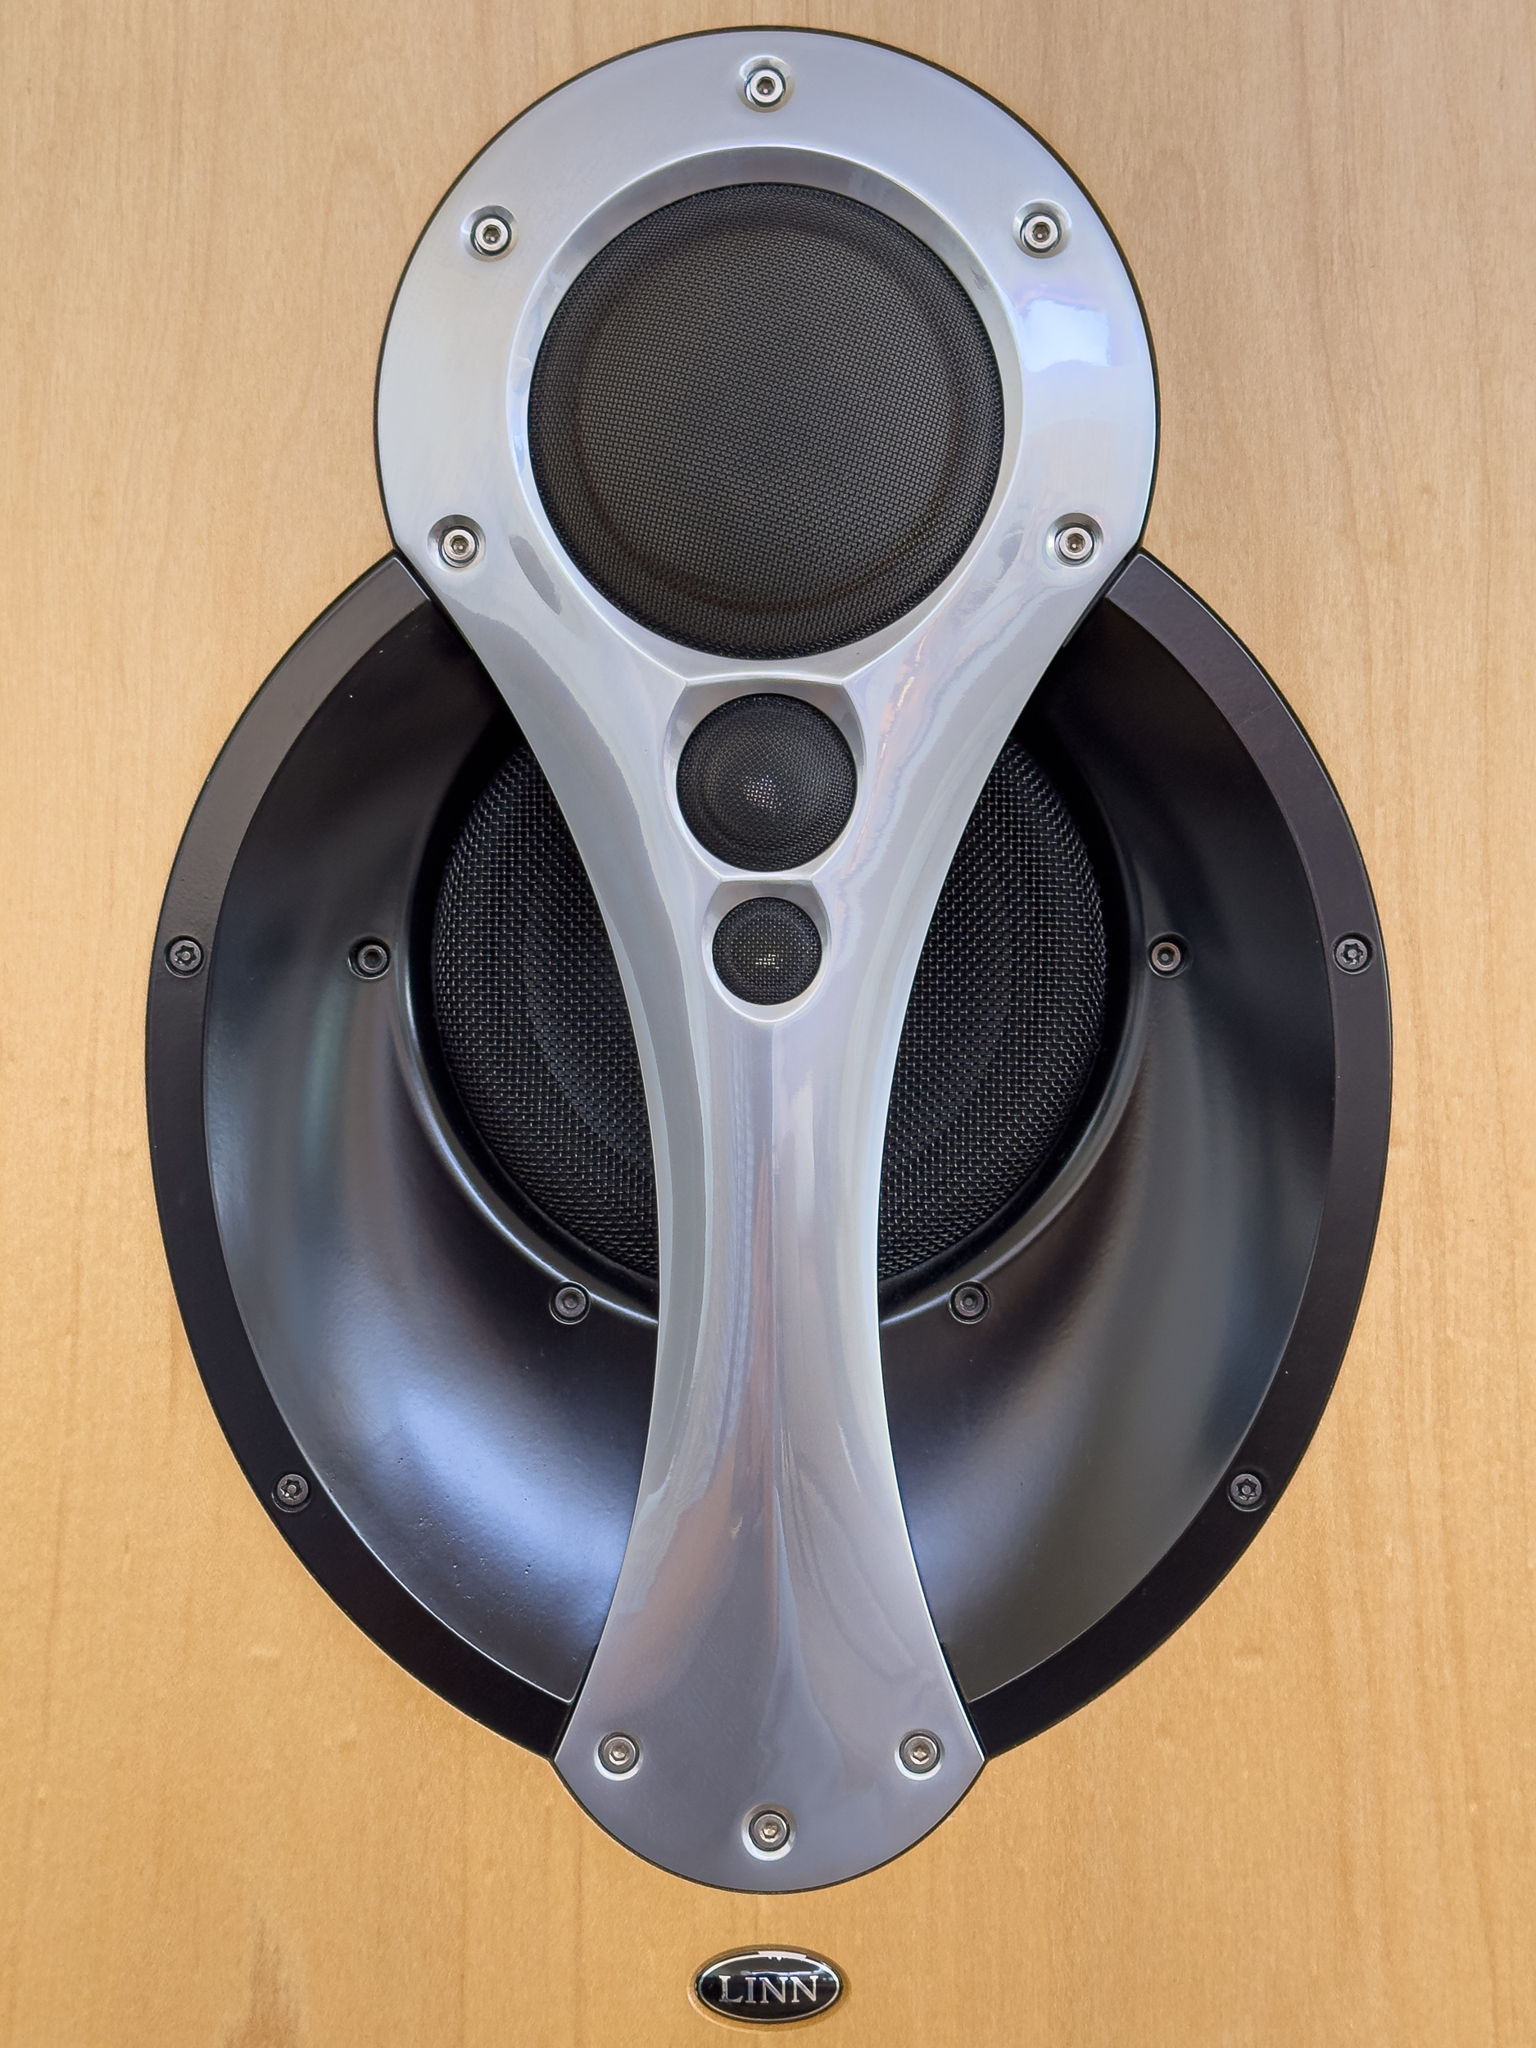 This is the 4K Acoustic Array. The three smallest drivers are (from top to bottom) the midrange, tweeter and super-tweeter. The larger driver behind them is the upper bass. 